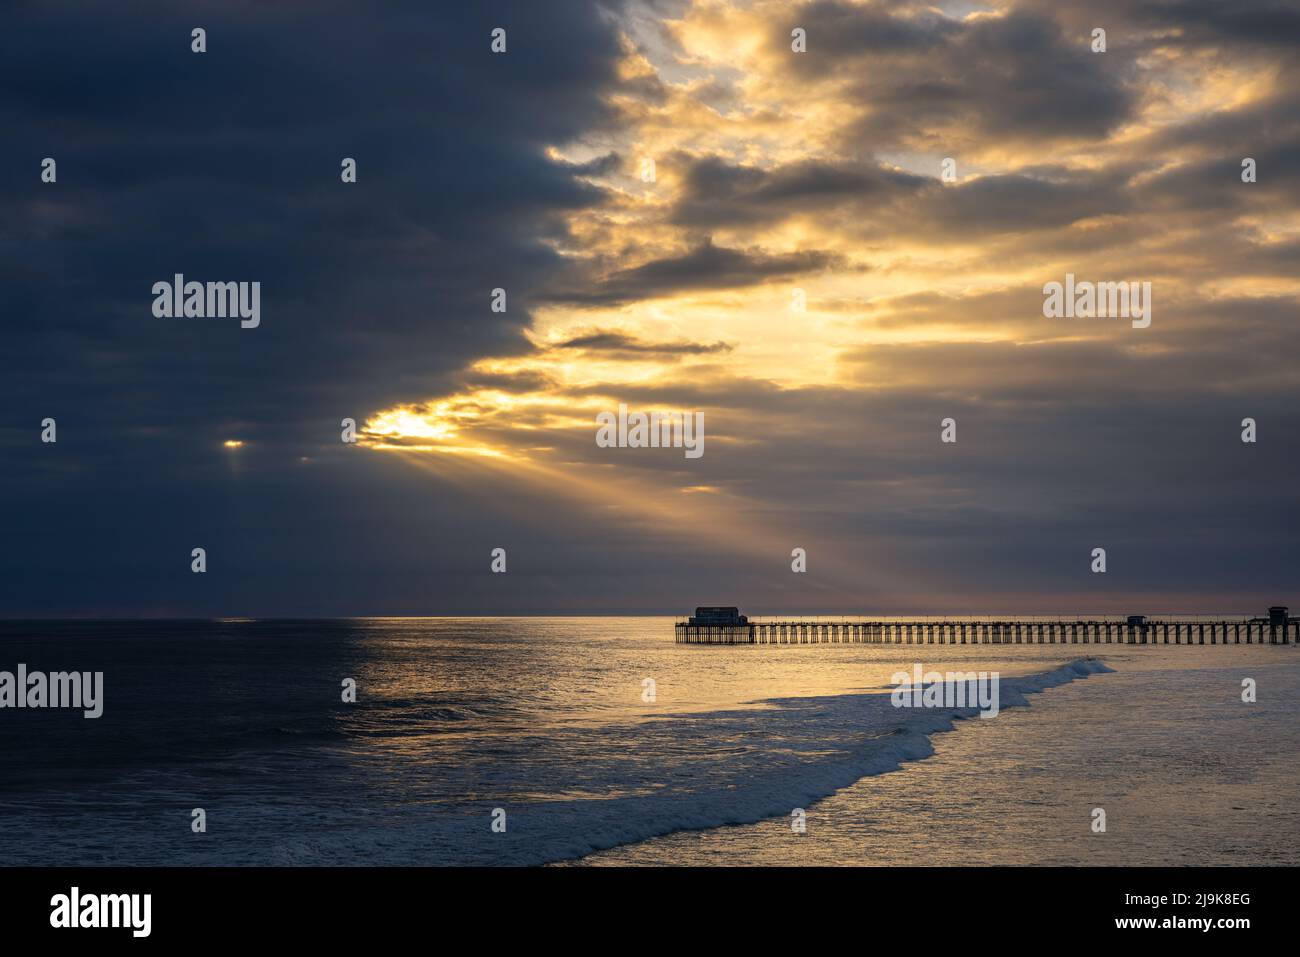 A ray of light shines through the clouds illuminating the Oceanside pier. Stock Photo